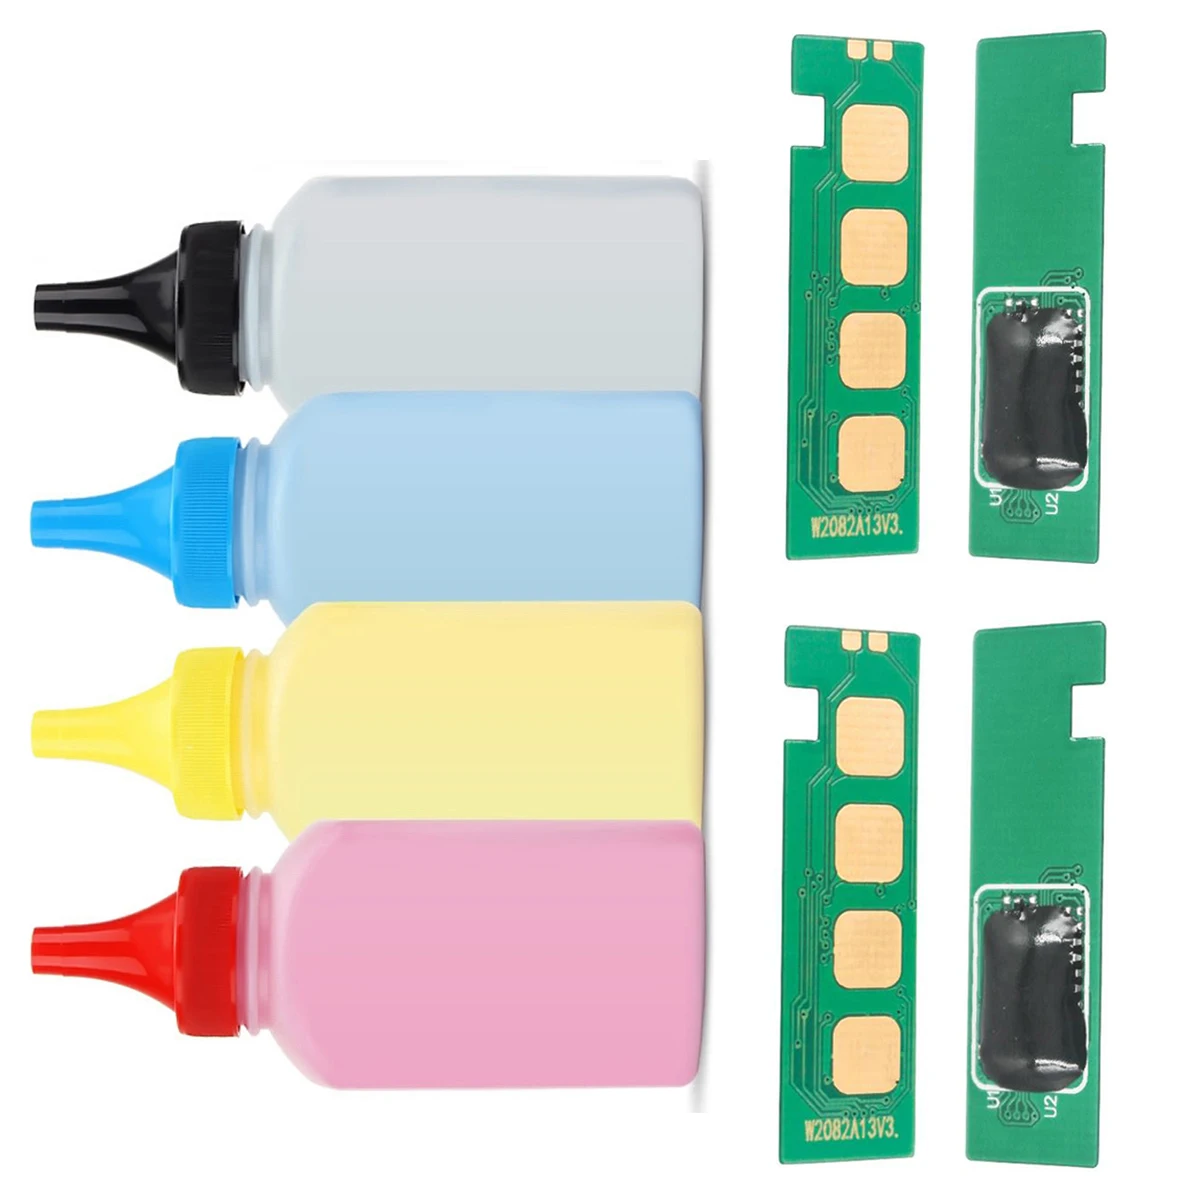 4 Refill Color toner Powder + 4 chip for 116a 117a 119A w2060a W2070a For HP MFP179fnw 178nw MFP178nw 150a 150nw